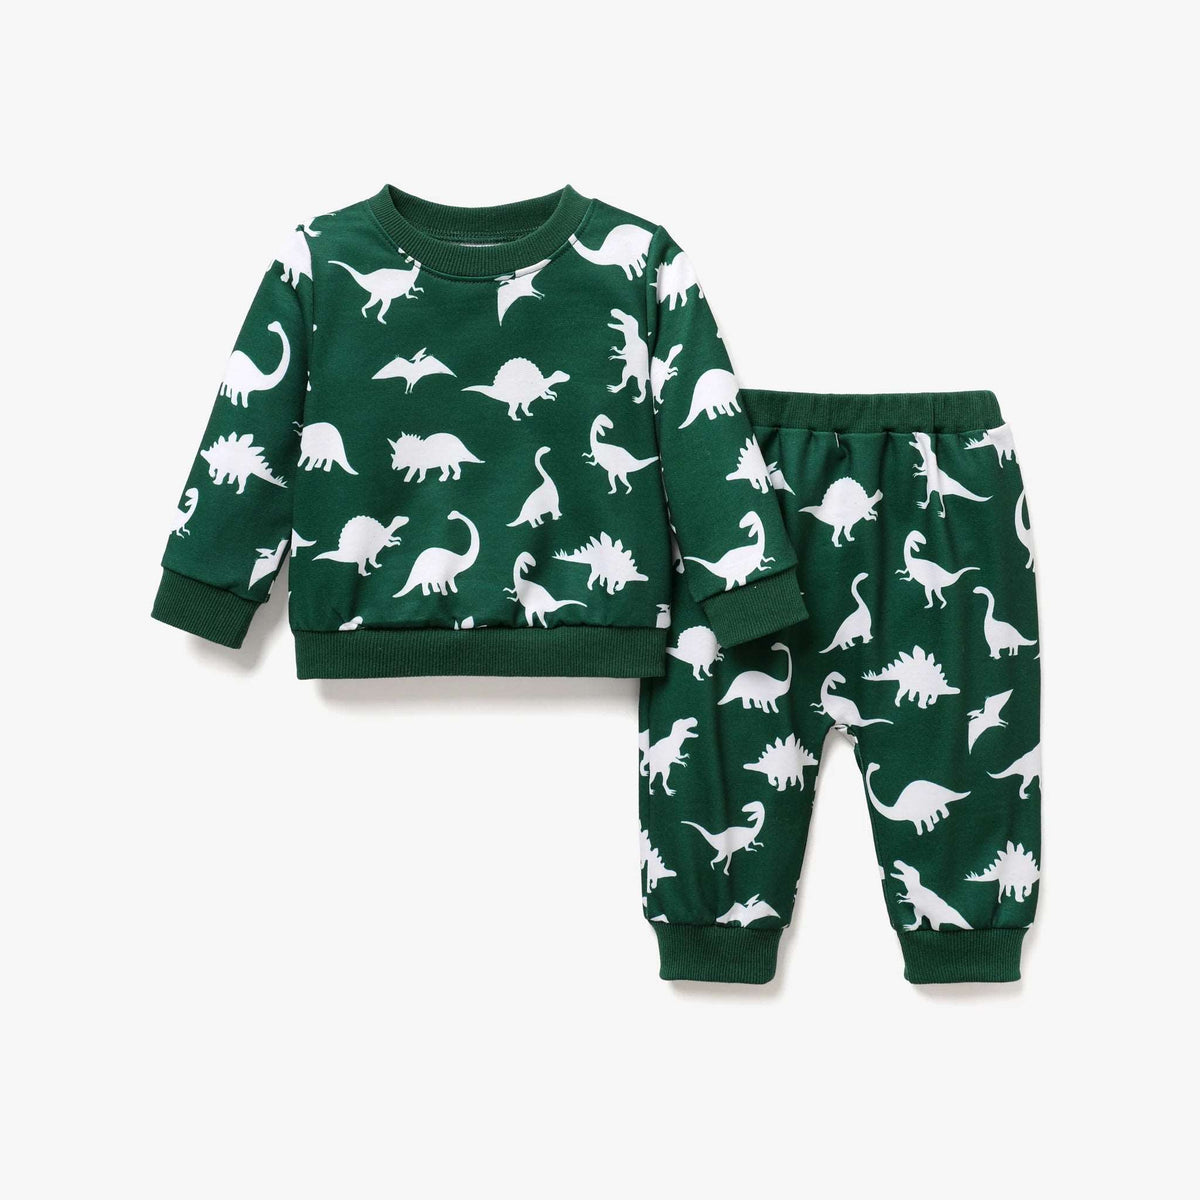 Baby Boy Casual Dinosaur Print Set - For all baby